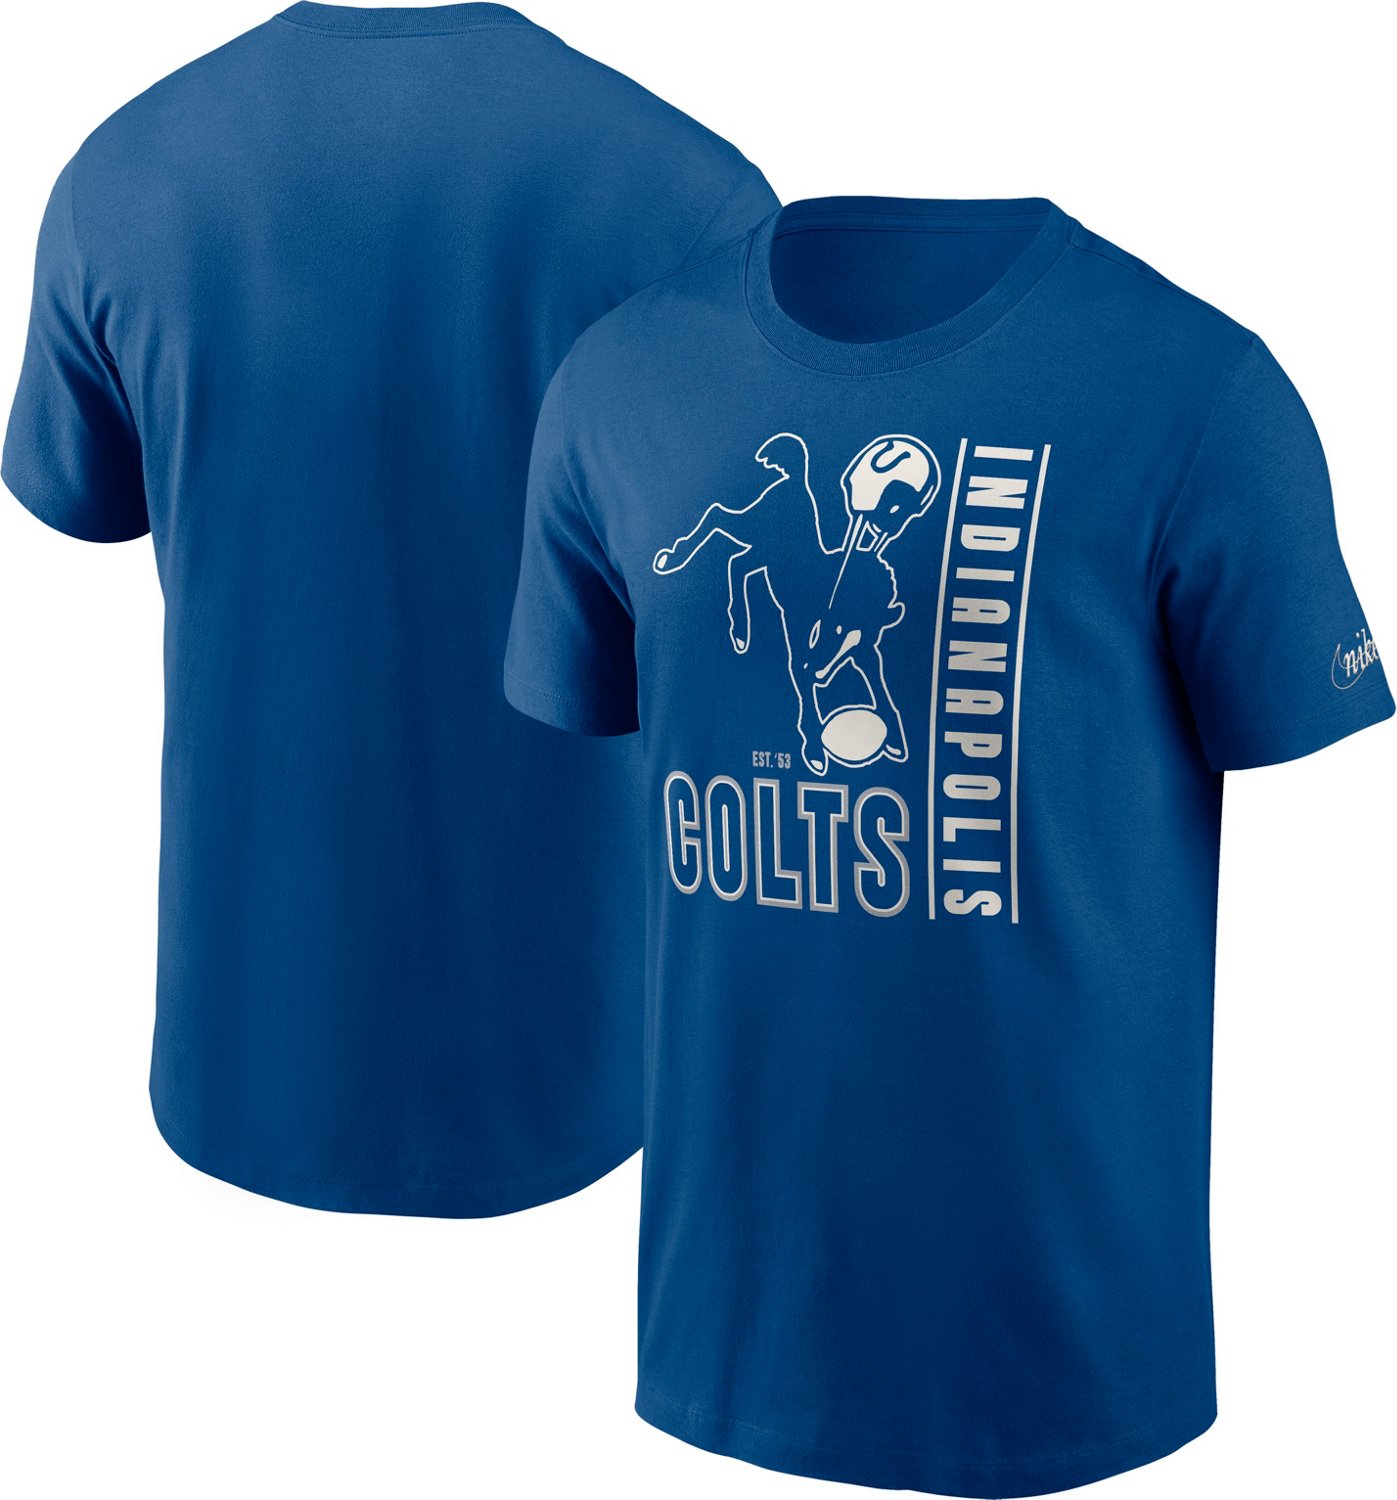 Nike Men's Indianapolis Colts Lockup Essential Graphic T-shirt